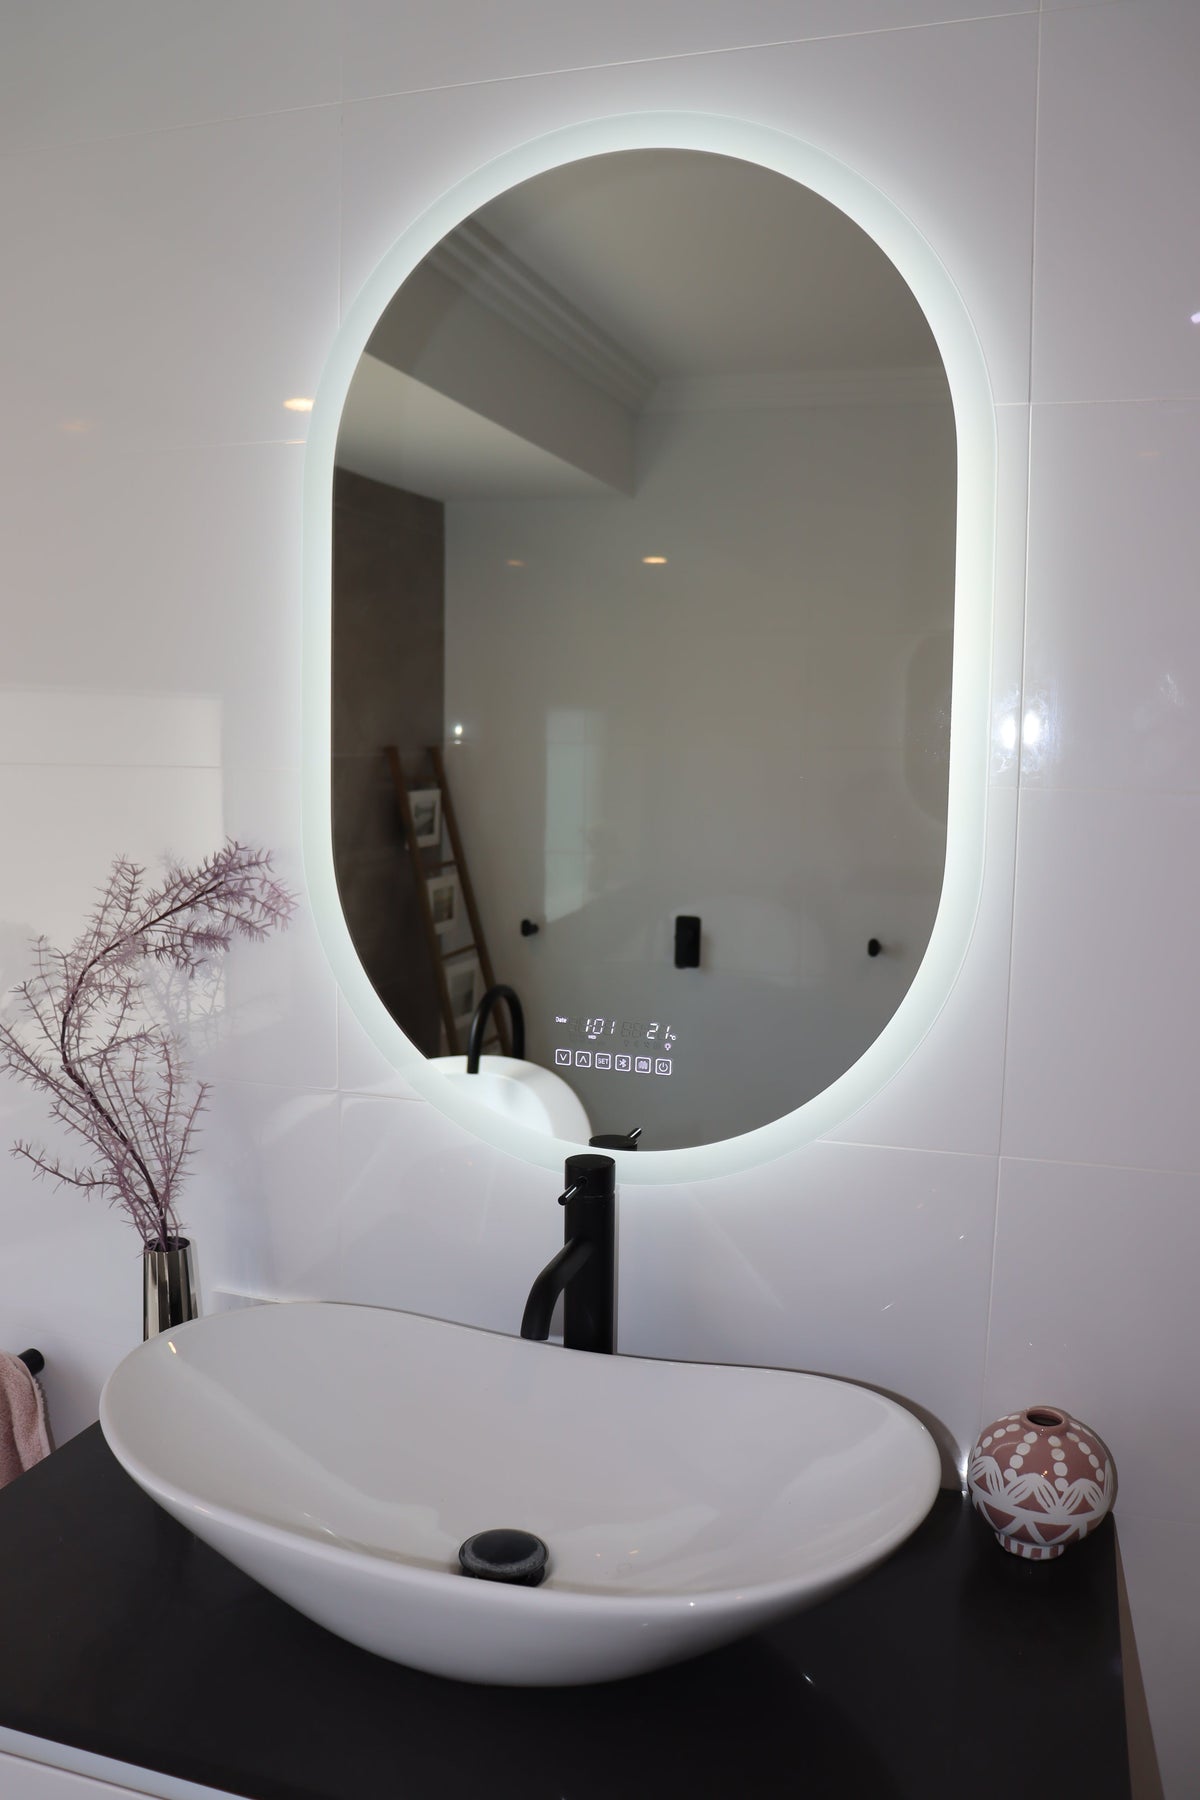 Oval Smart LED mirror with brilliant white backlit LED light and black bathroom countertop